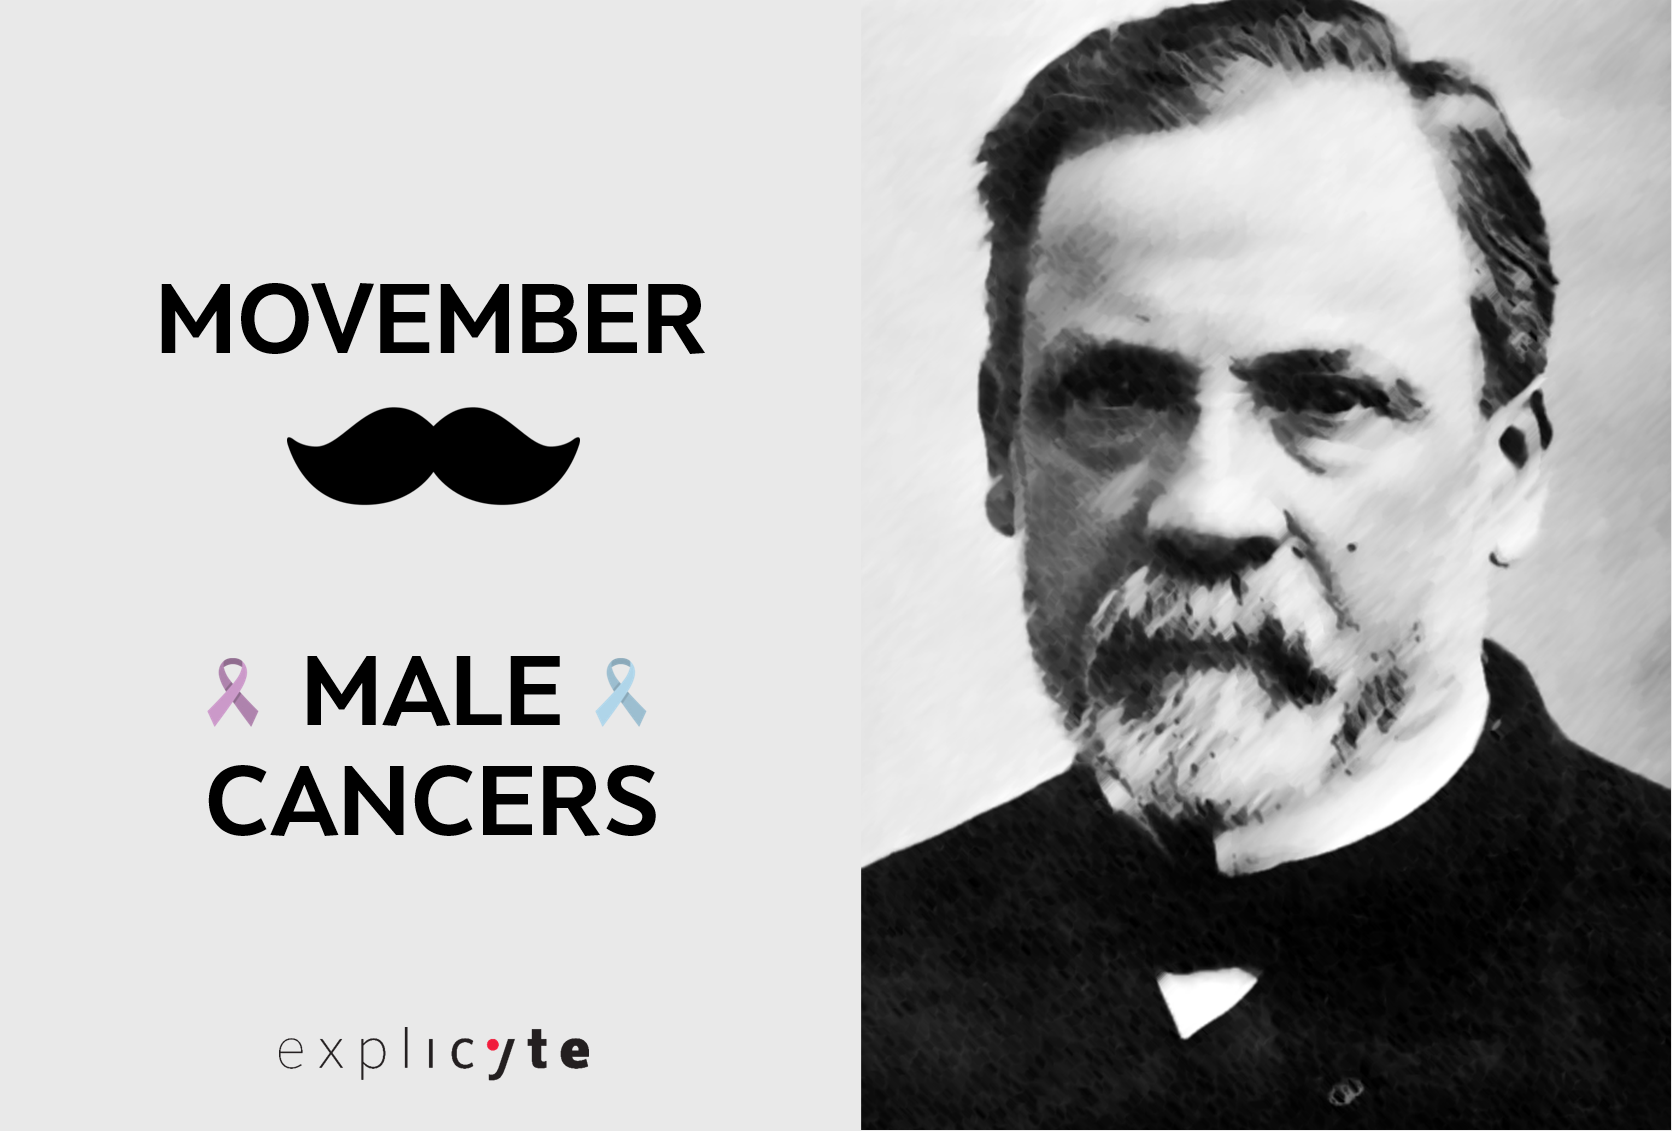 Check out – Our mustachioed icon as favorite image of November!